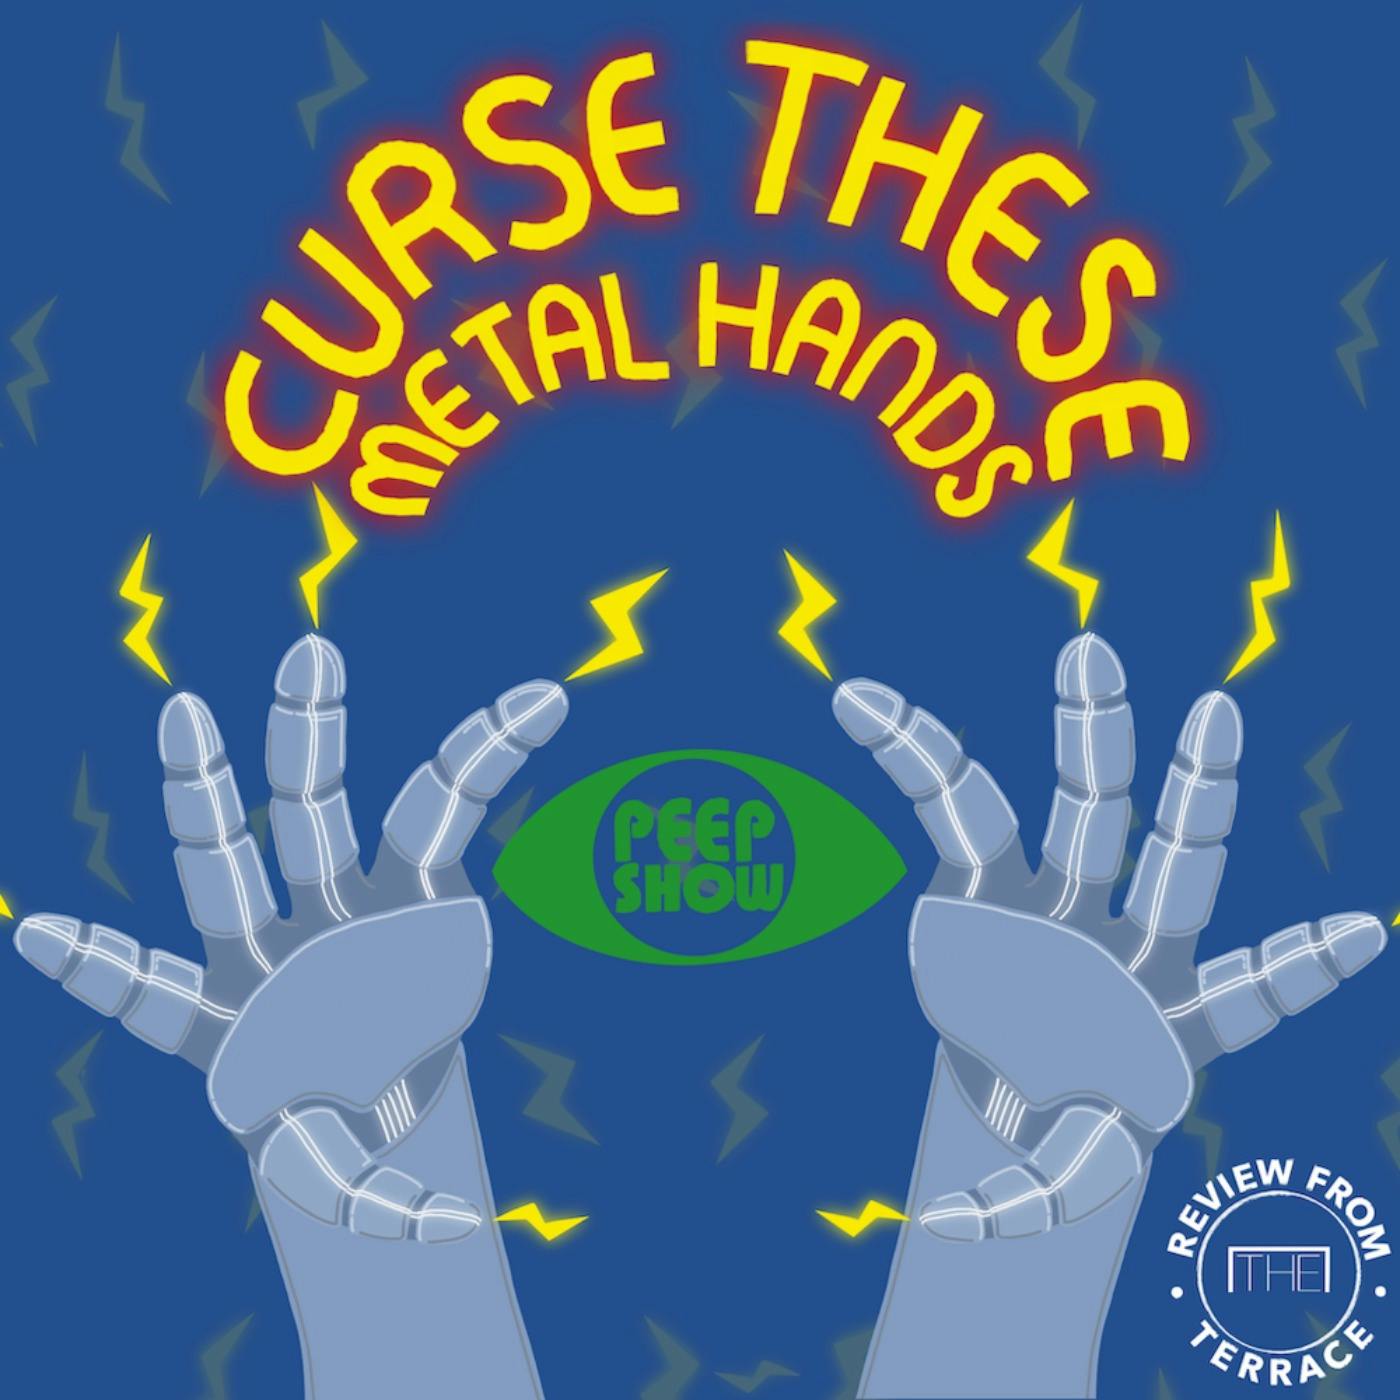 Curse These Metal Hands: A Peep Show podcast (episode 6)